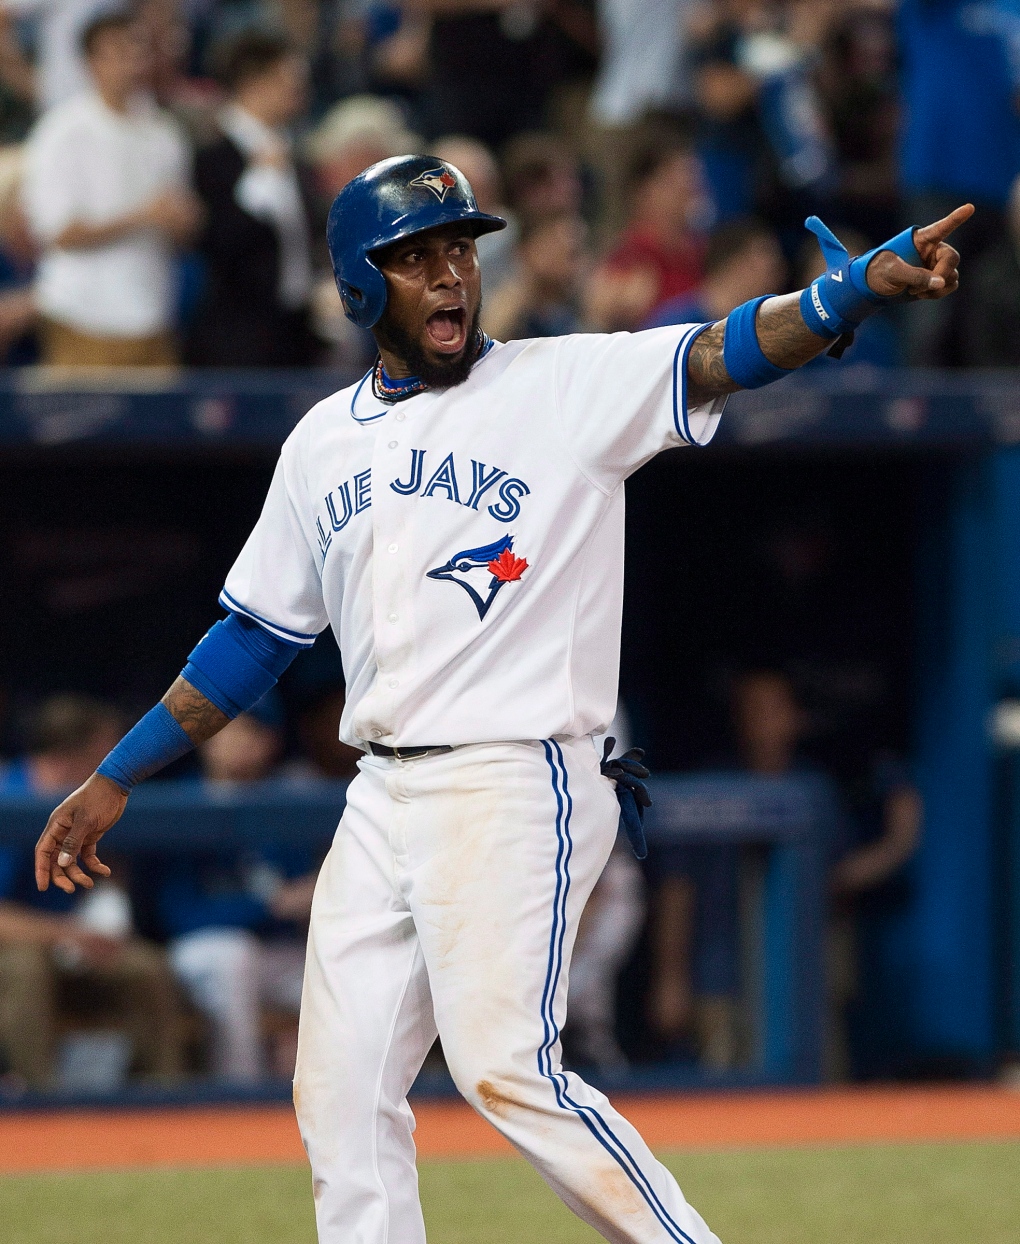 Reyes of Old: Toronto shortstop Jose Reyes healthy and in top form for Jays